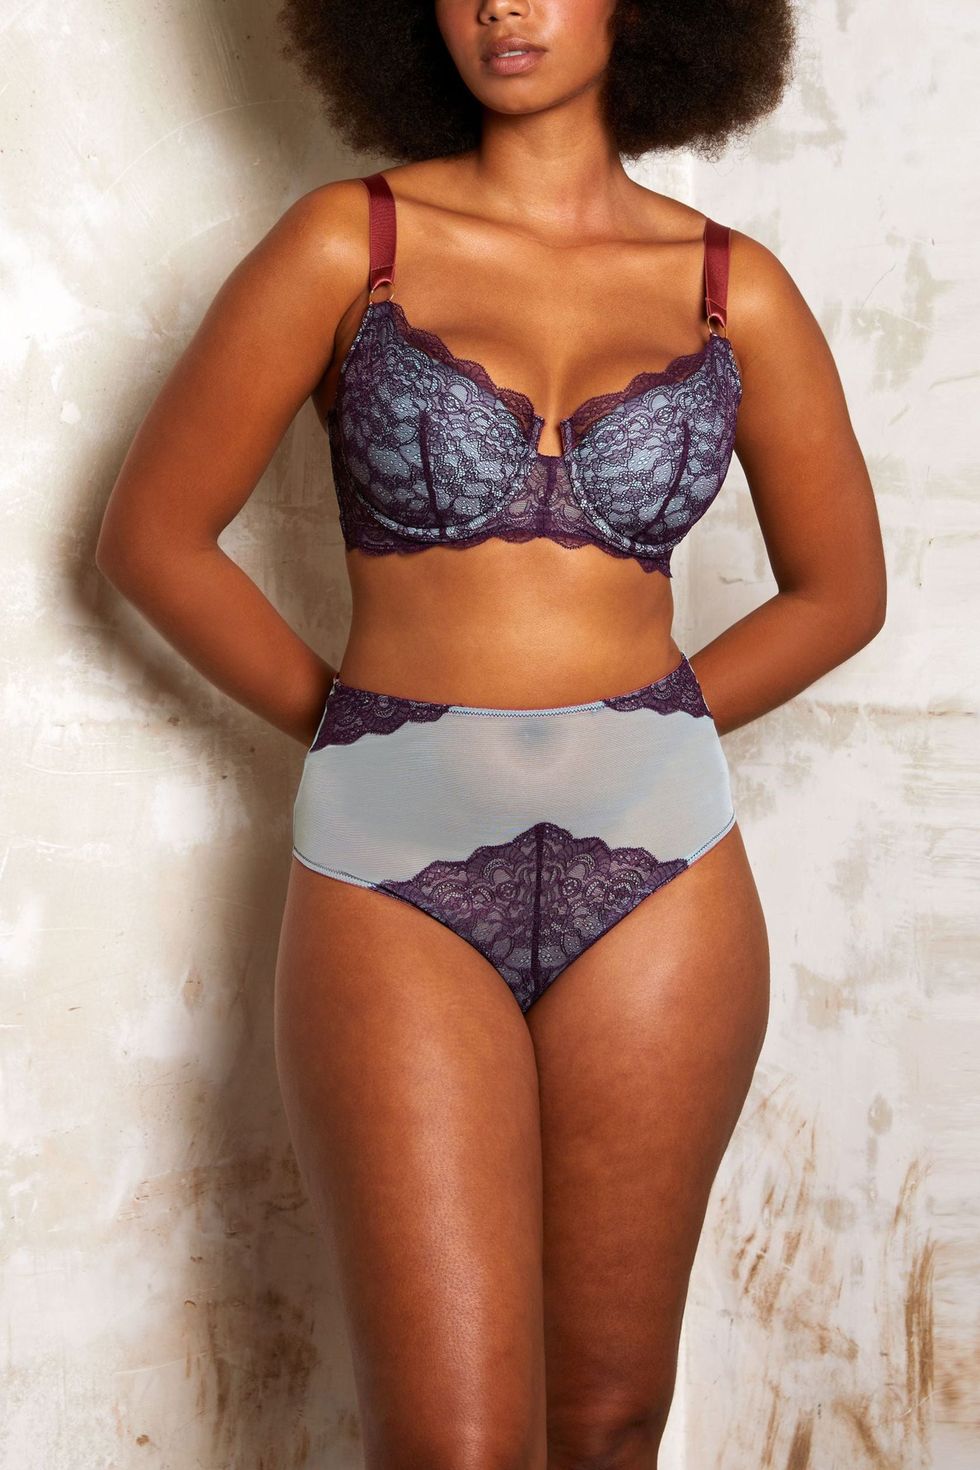 Sexy plus size lingerie brands to buy right now